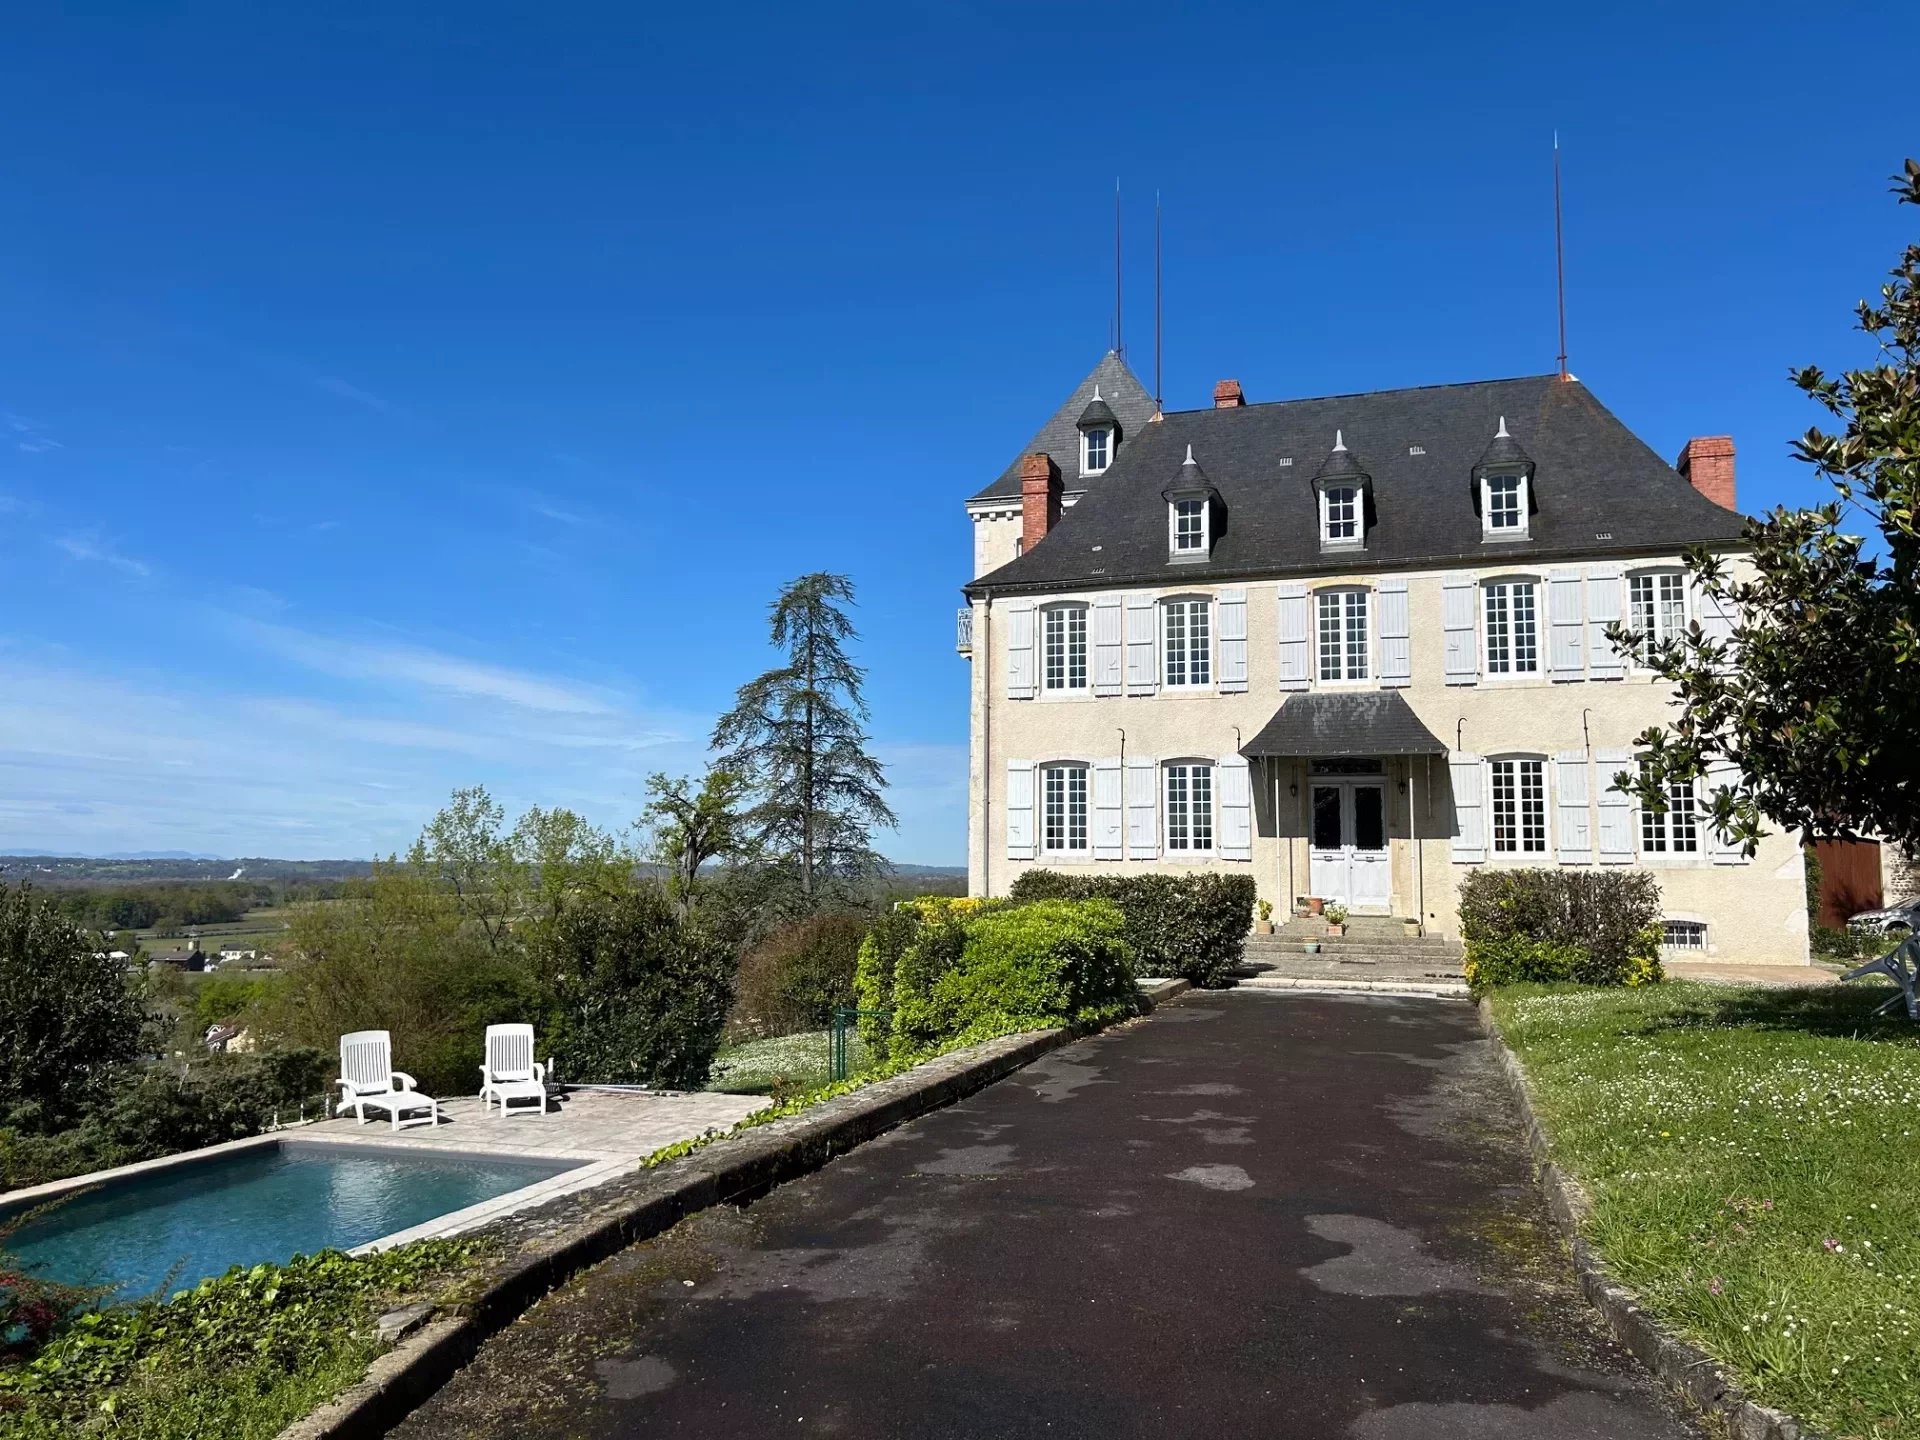 Elegant Château with a breathtaking view of the Pyrenees mountains